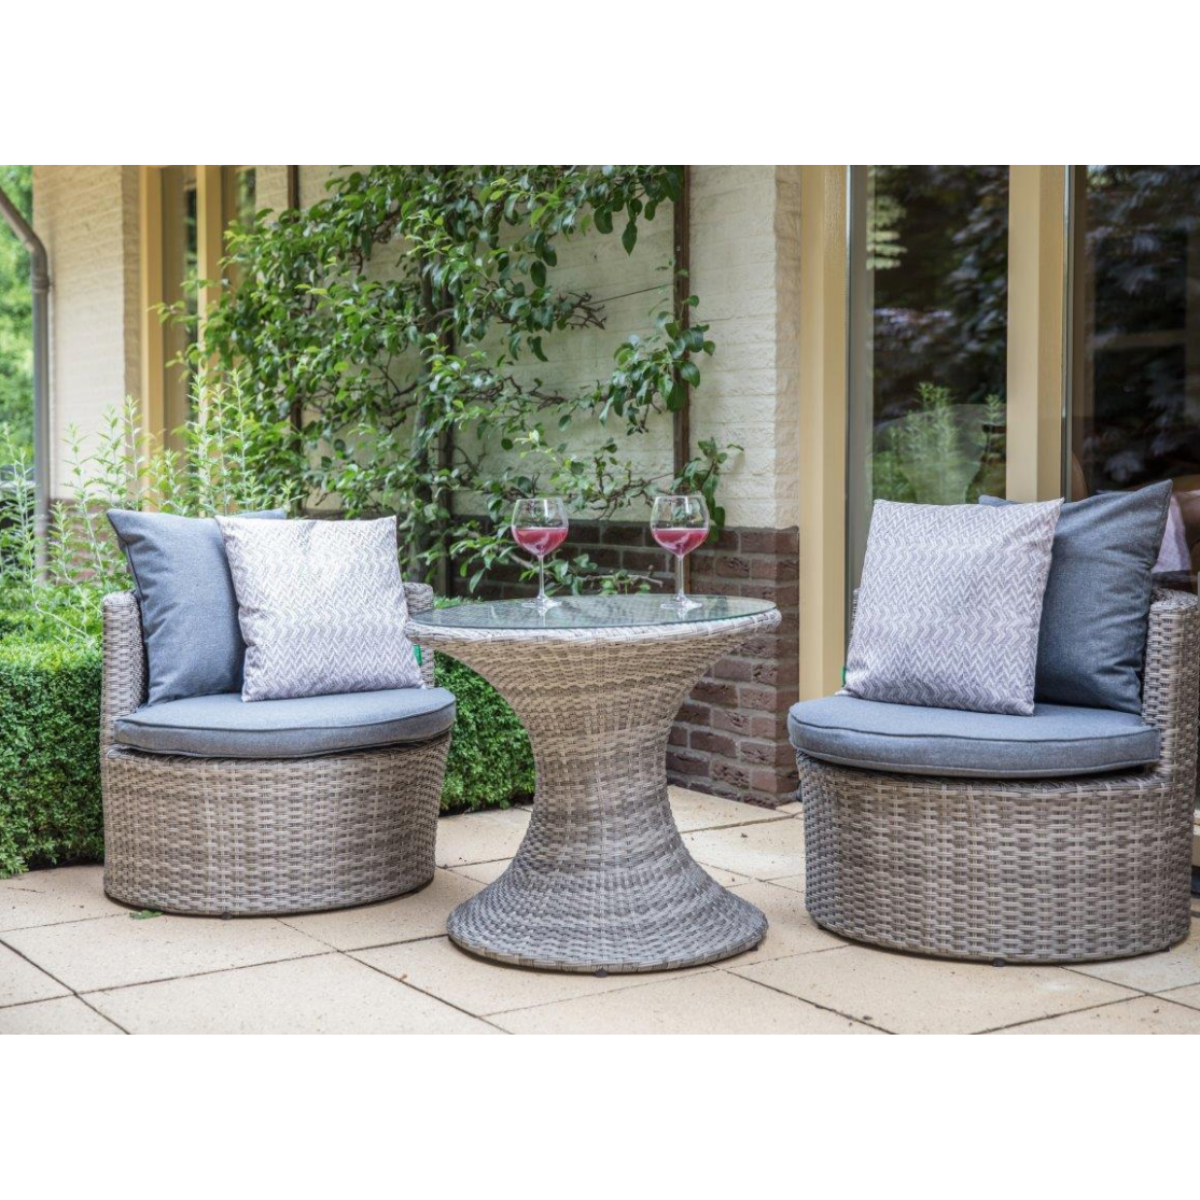 Nancy's Bitoche Lounge Set - Wicker and Aluminum Frame - Gray 